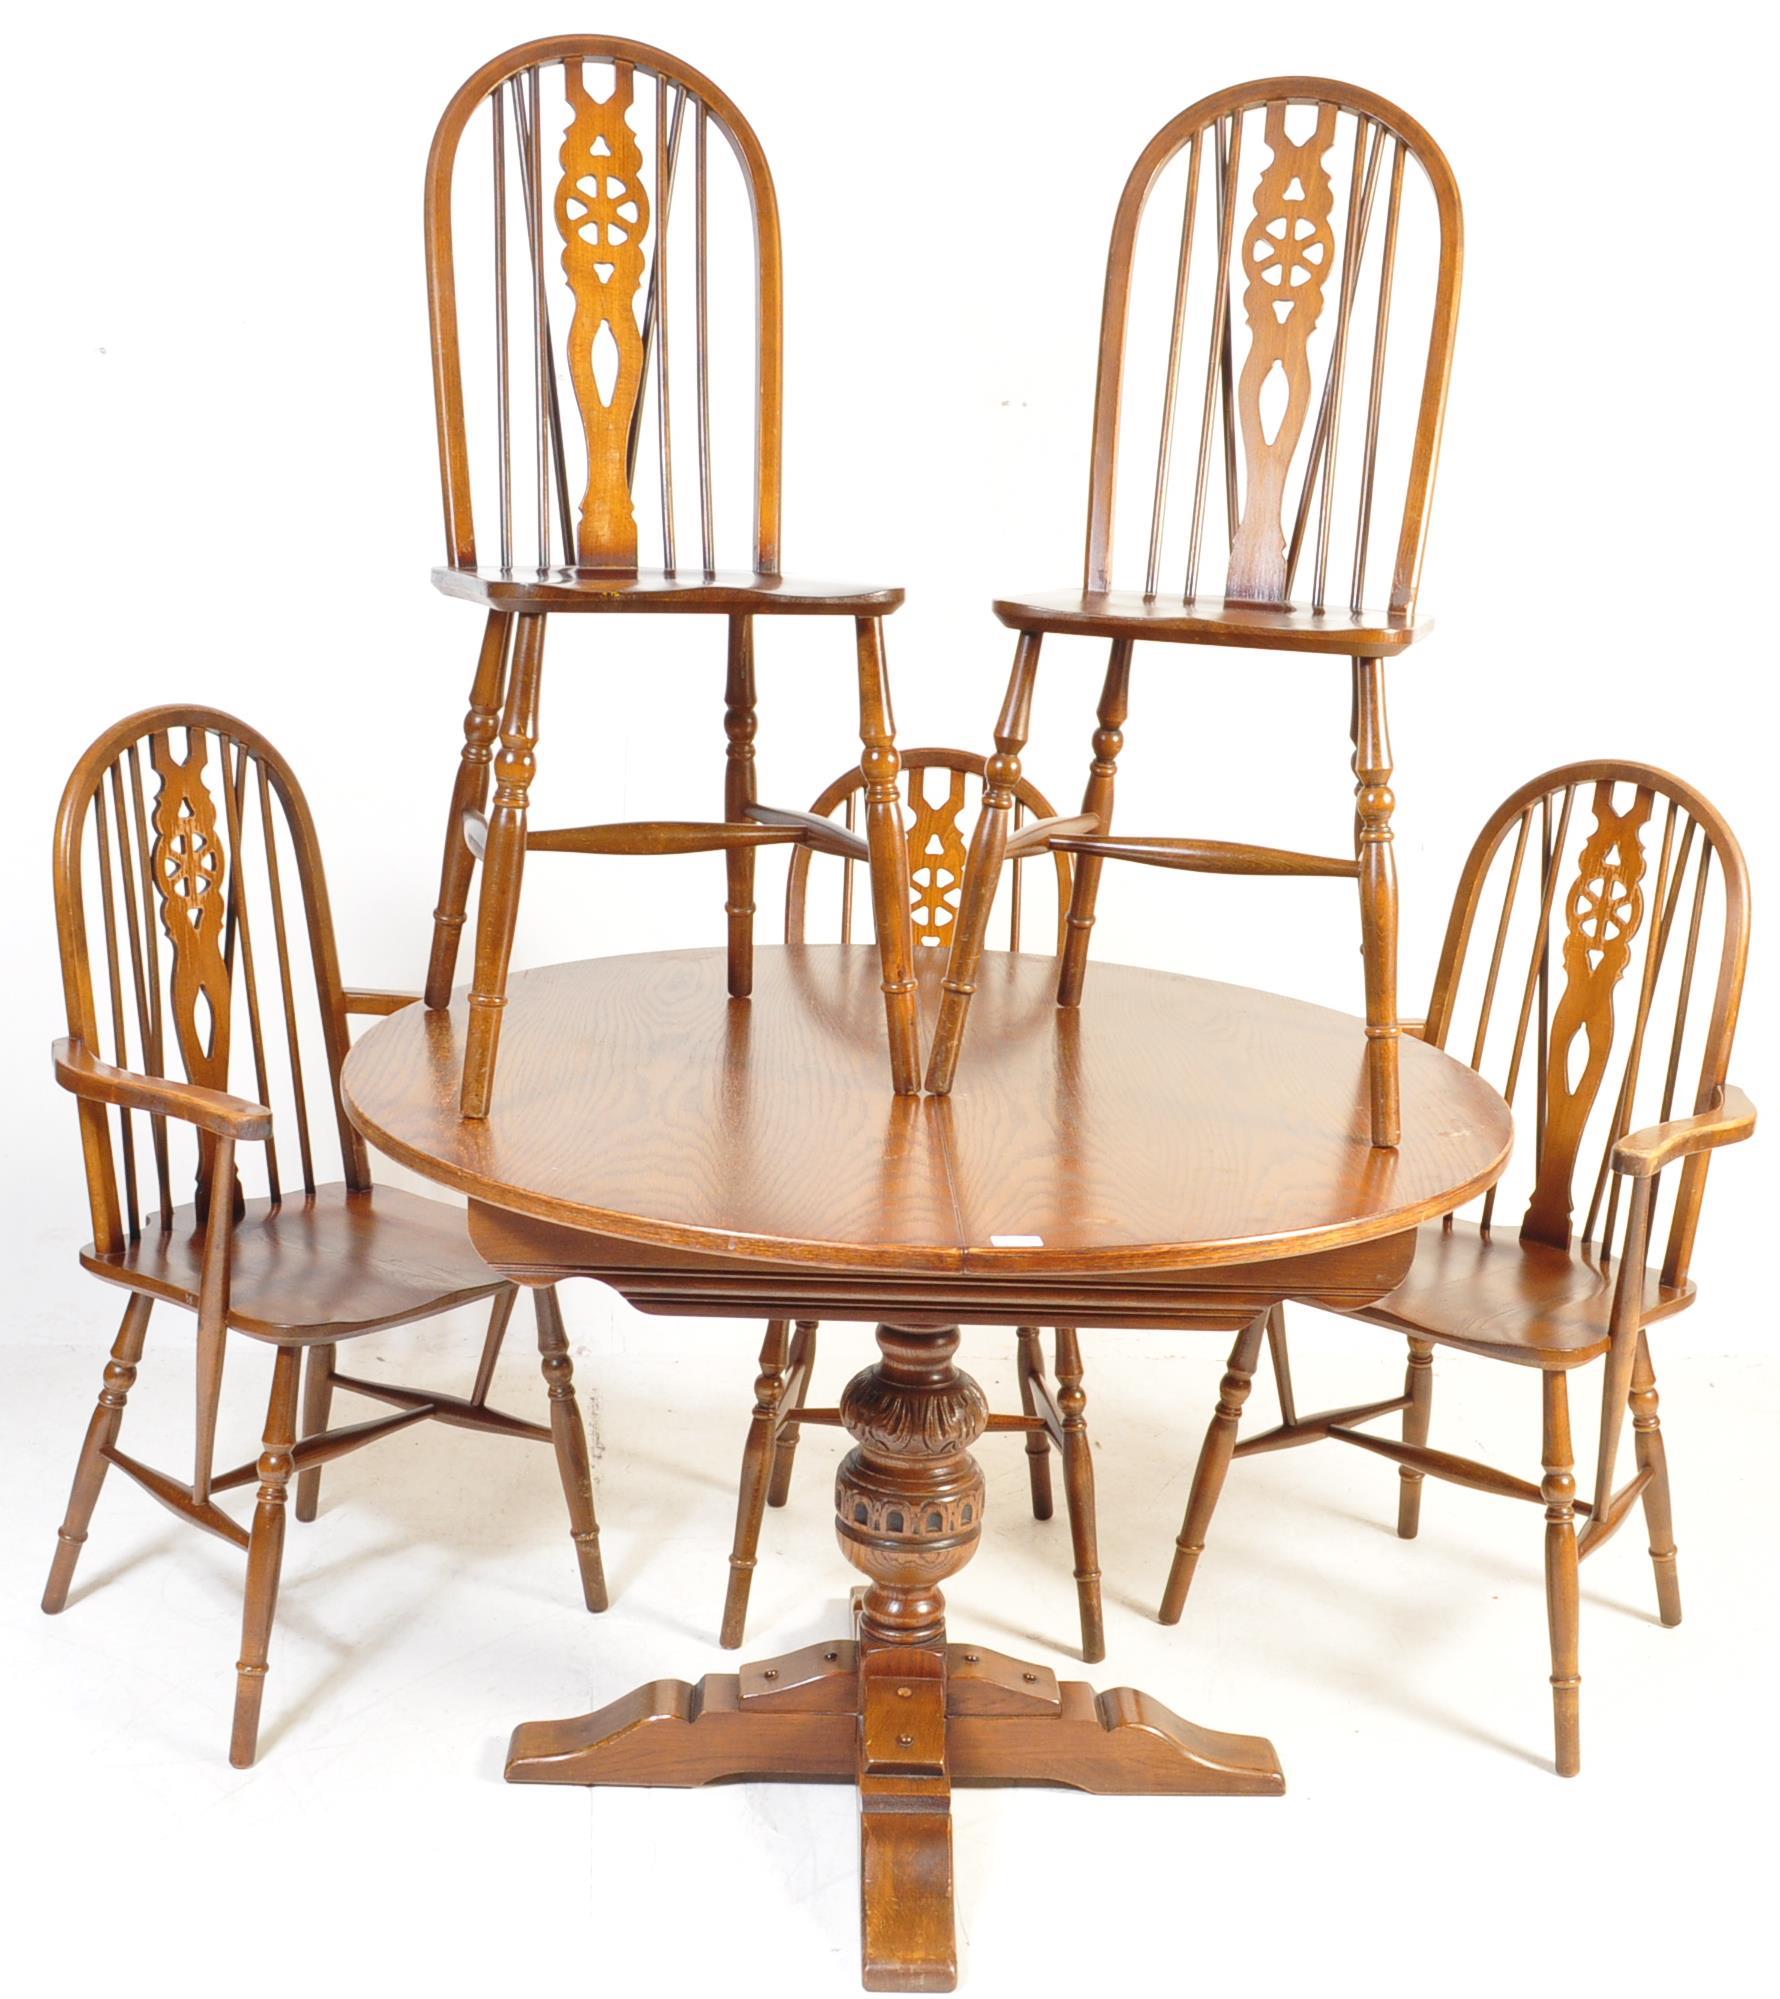 WOOD BROS OLD CHARM JACOBEAN REVIVAL DINING TABLE CHAIRS - Image 4 of 20